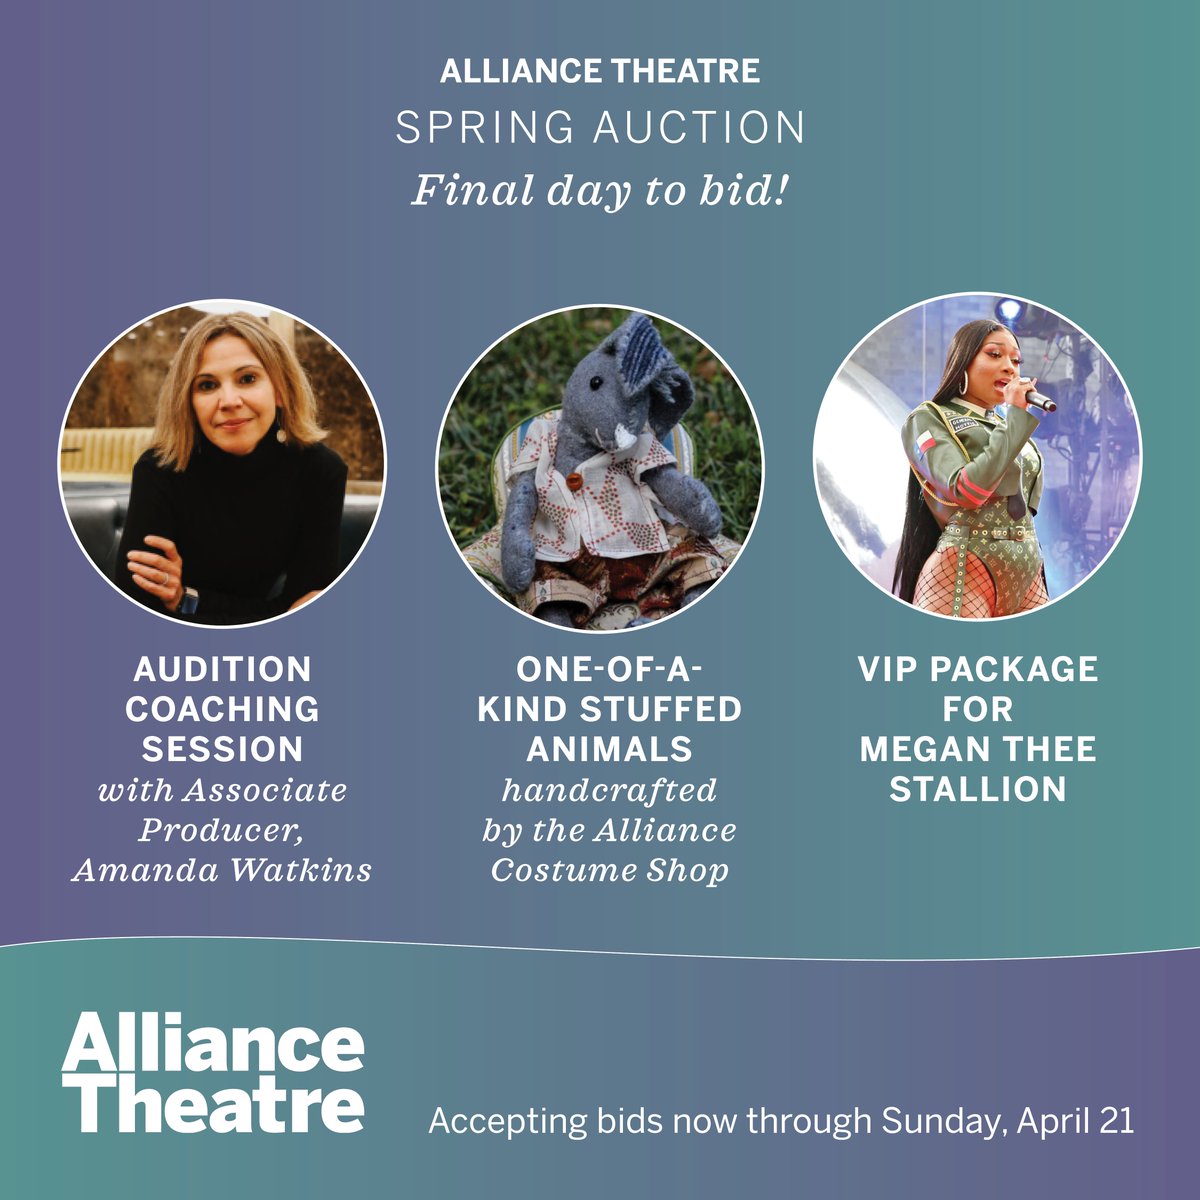 Today's the day! 🎭 Our annual auction closes tonight at 8 PM, so don't miss your chance to bid on any of these remaining lots! Visit the link for your chance to win these once in a lifetime prizes! ✨biddingforgood.com/alliancetheatre